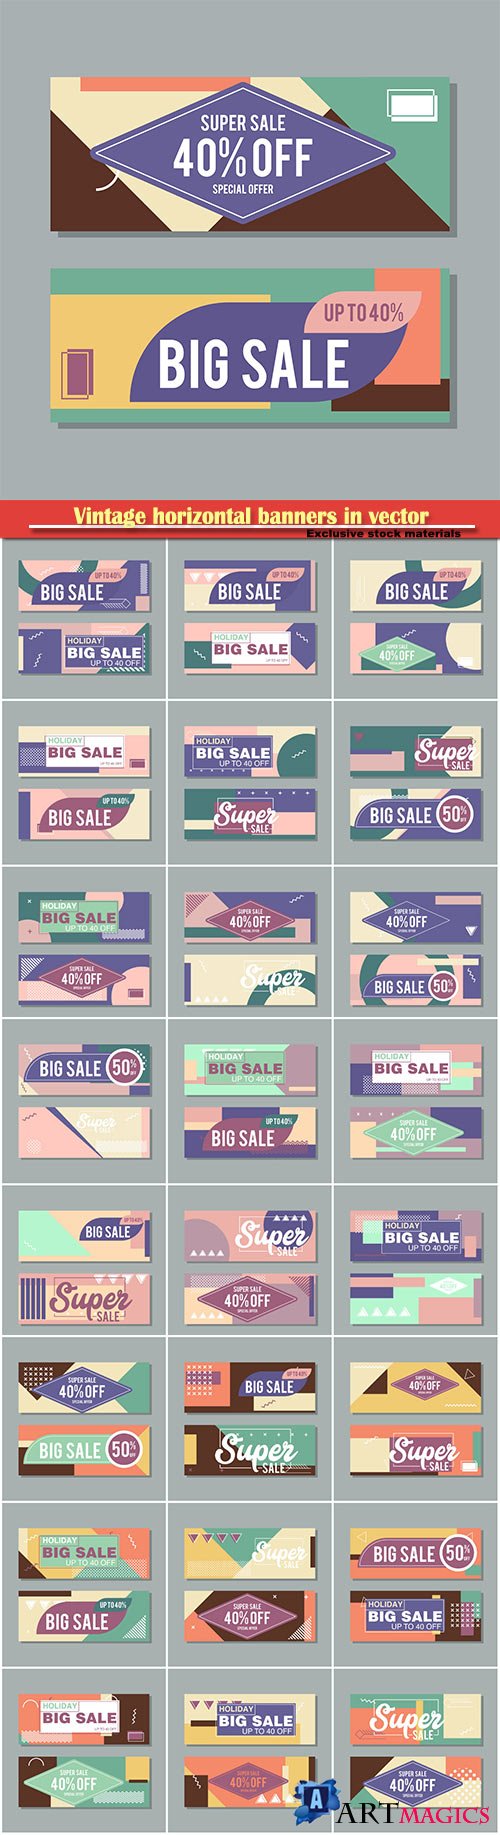 Vintage horizontal banners in vector, discount coupons